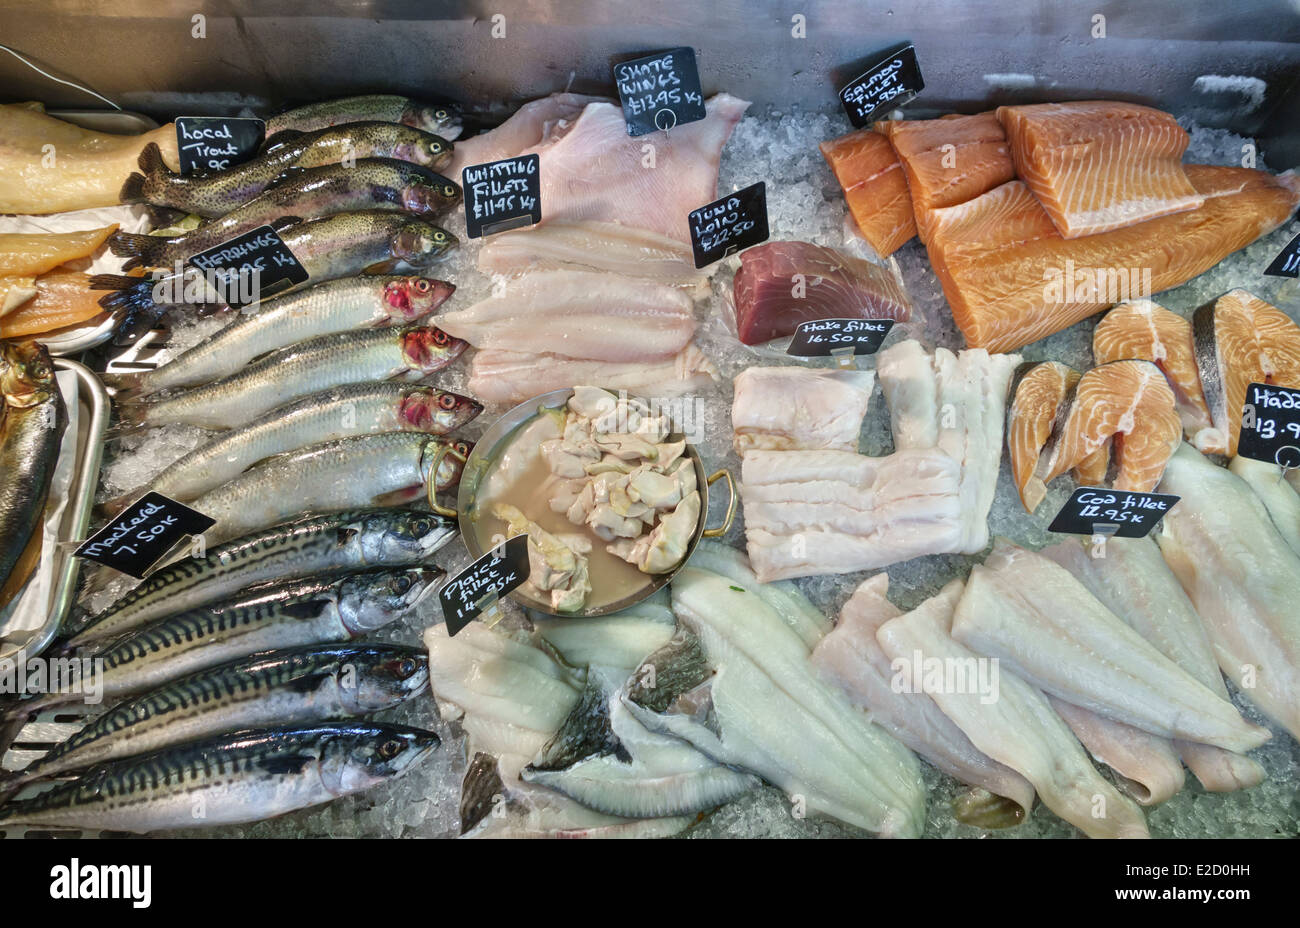 Fresh fish for sale in a local fishmonger's shop, Wales, UK - trout, herring, mackerel, whiting, salmon, hake and cod and others Stock Photo